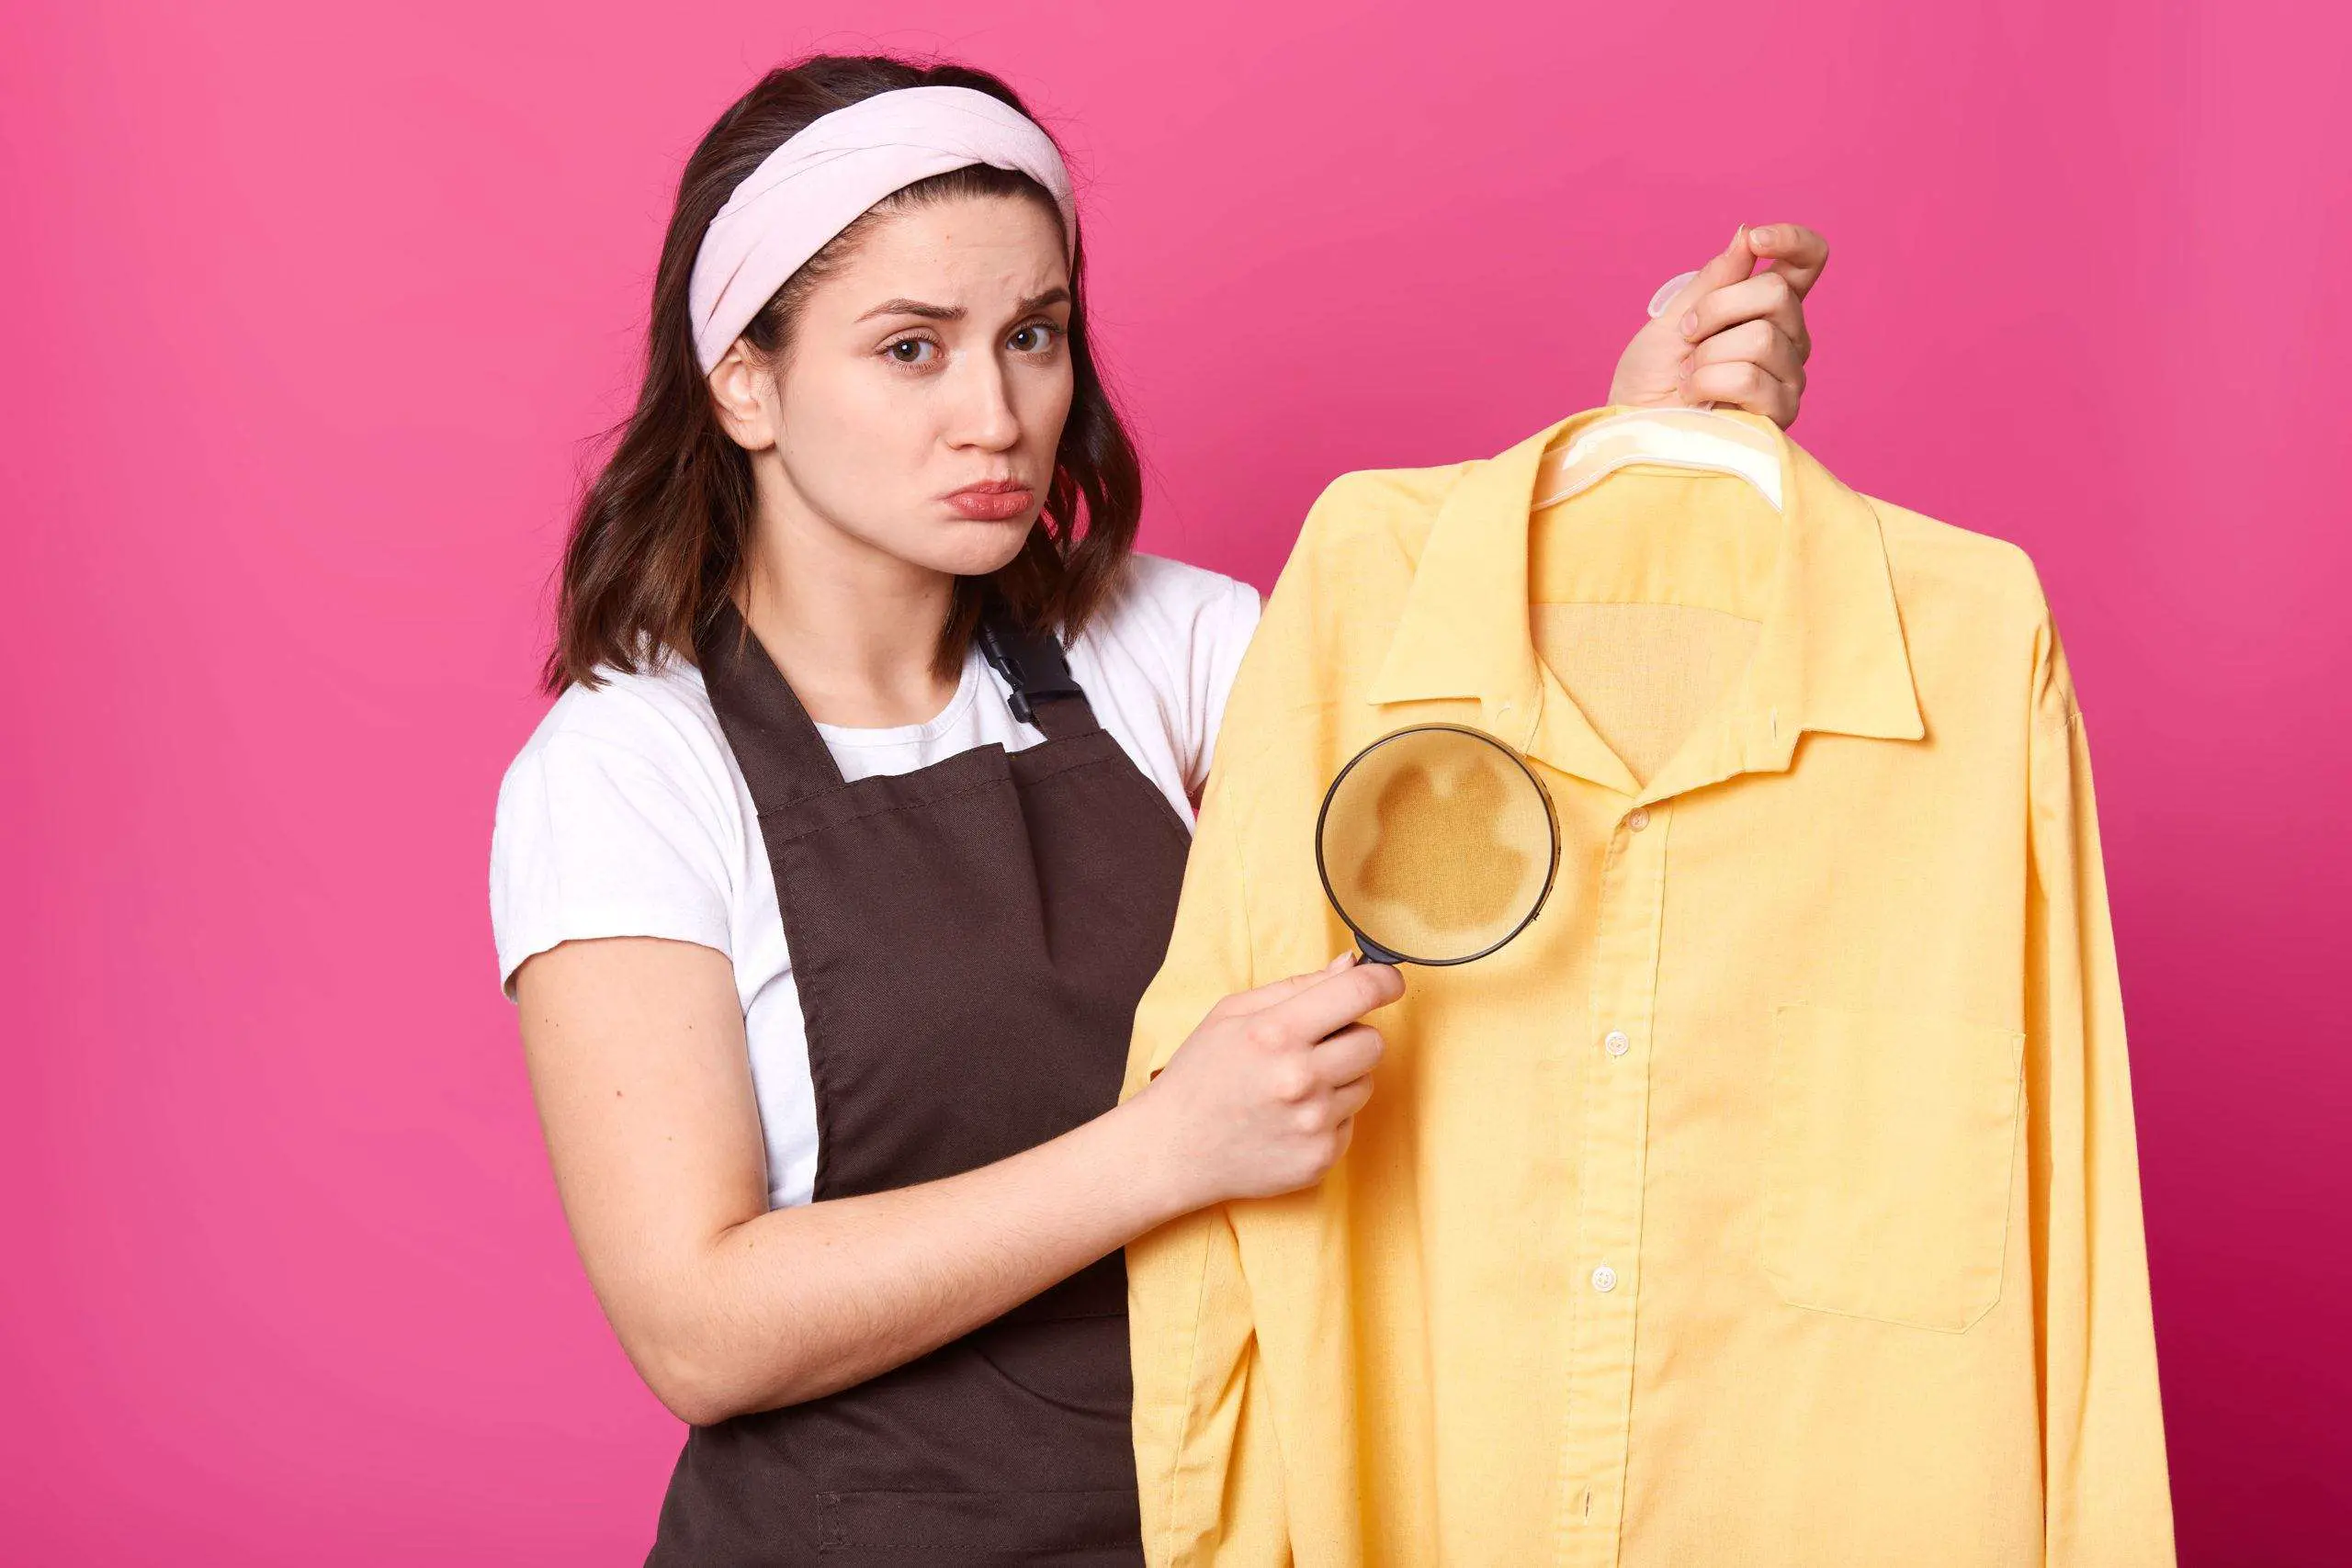 Brunette housewife holds yellow shirt after laundry with coffee stain on fabric, having magnifying glass in one hand. Emotional cute young model wearing brown apron, white t shirt and headband.